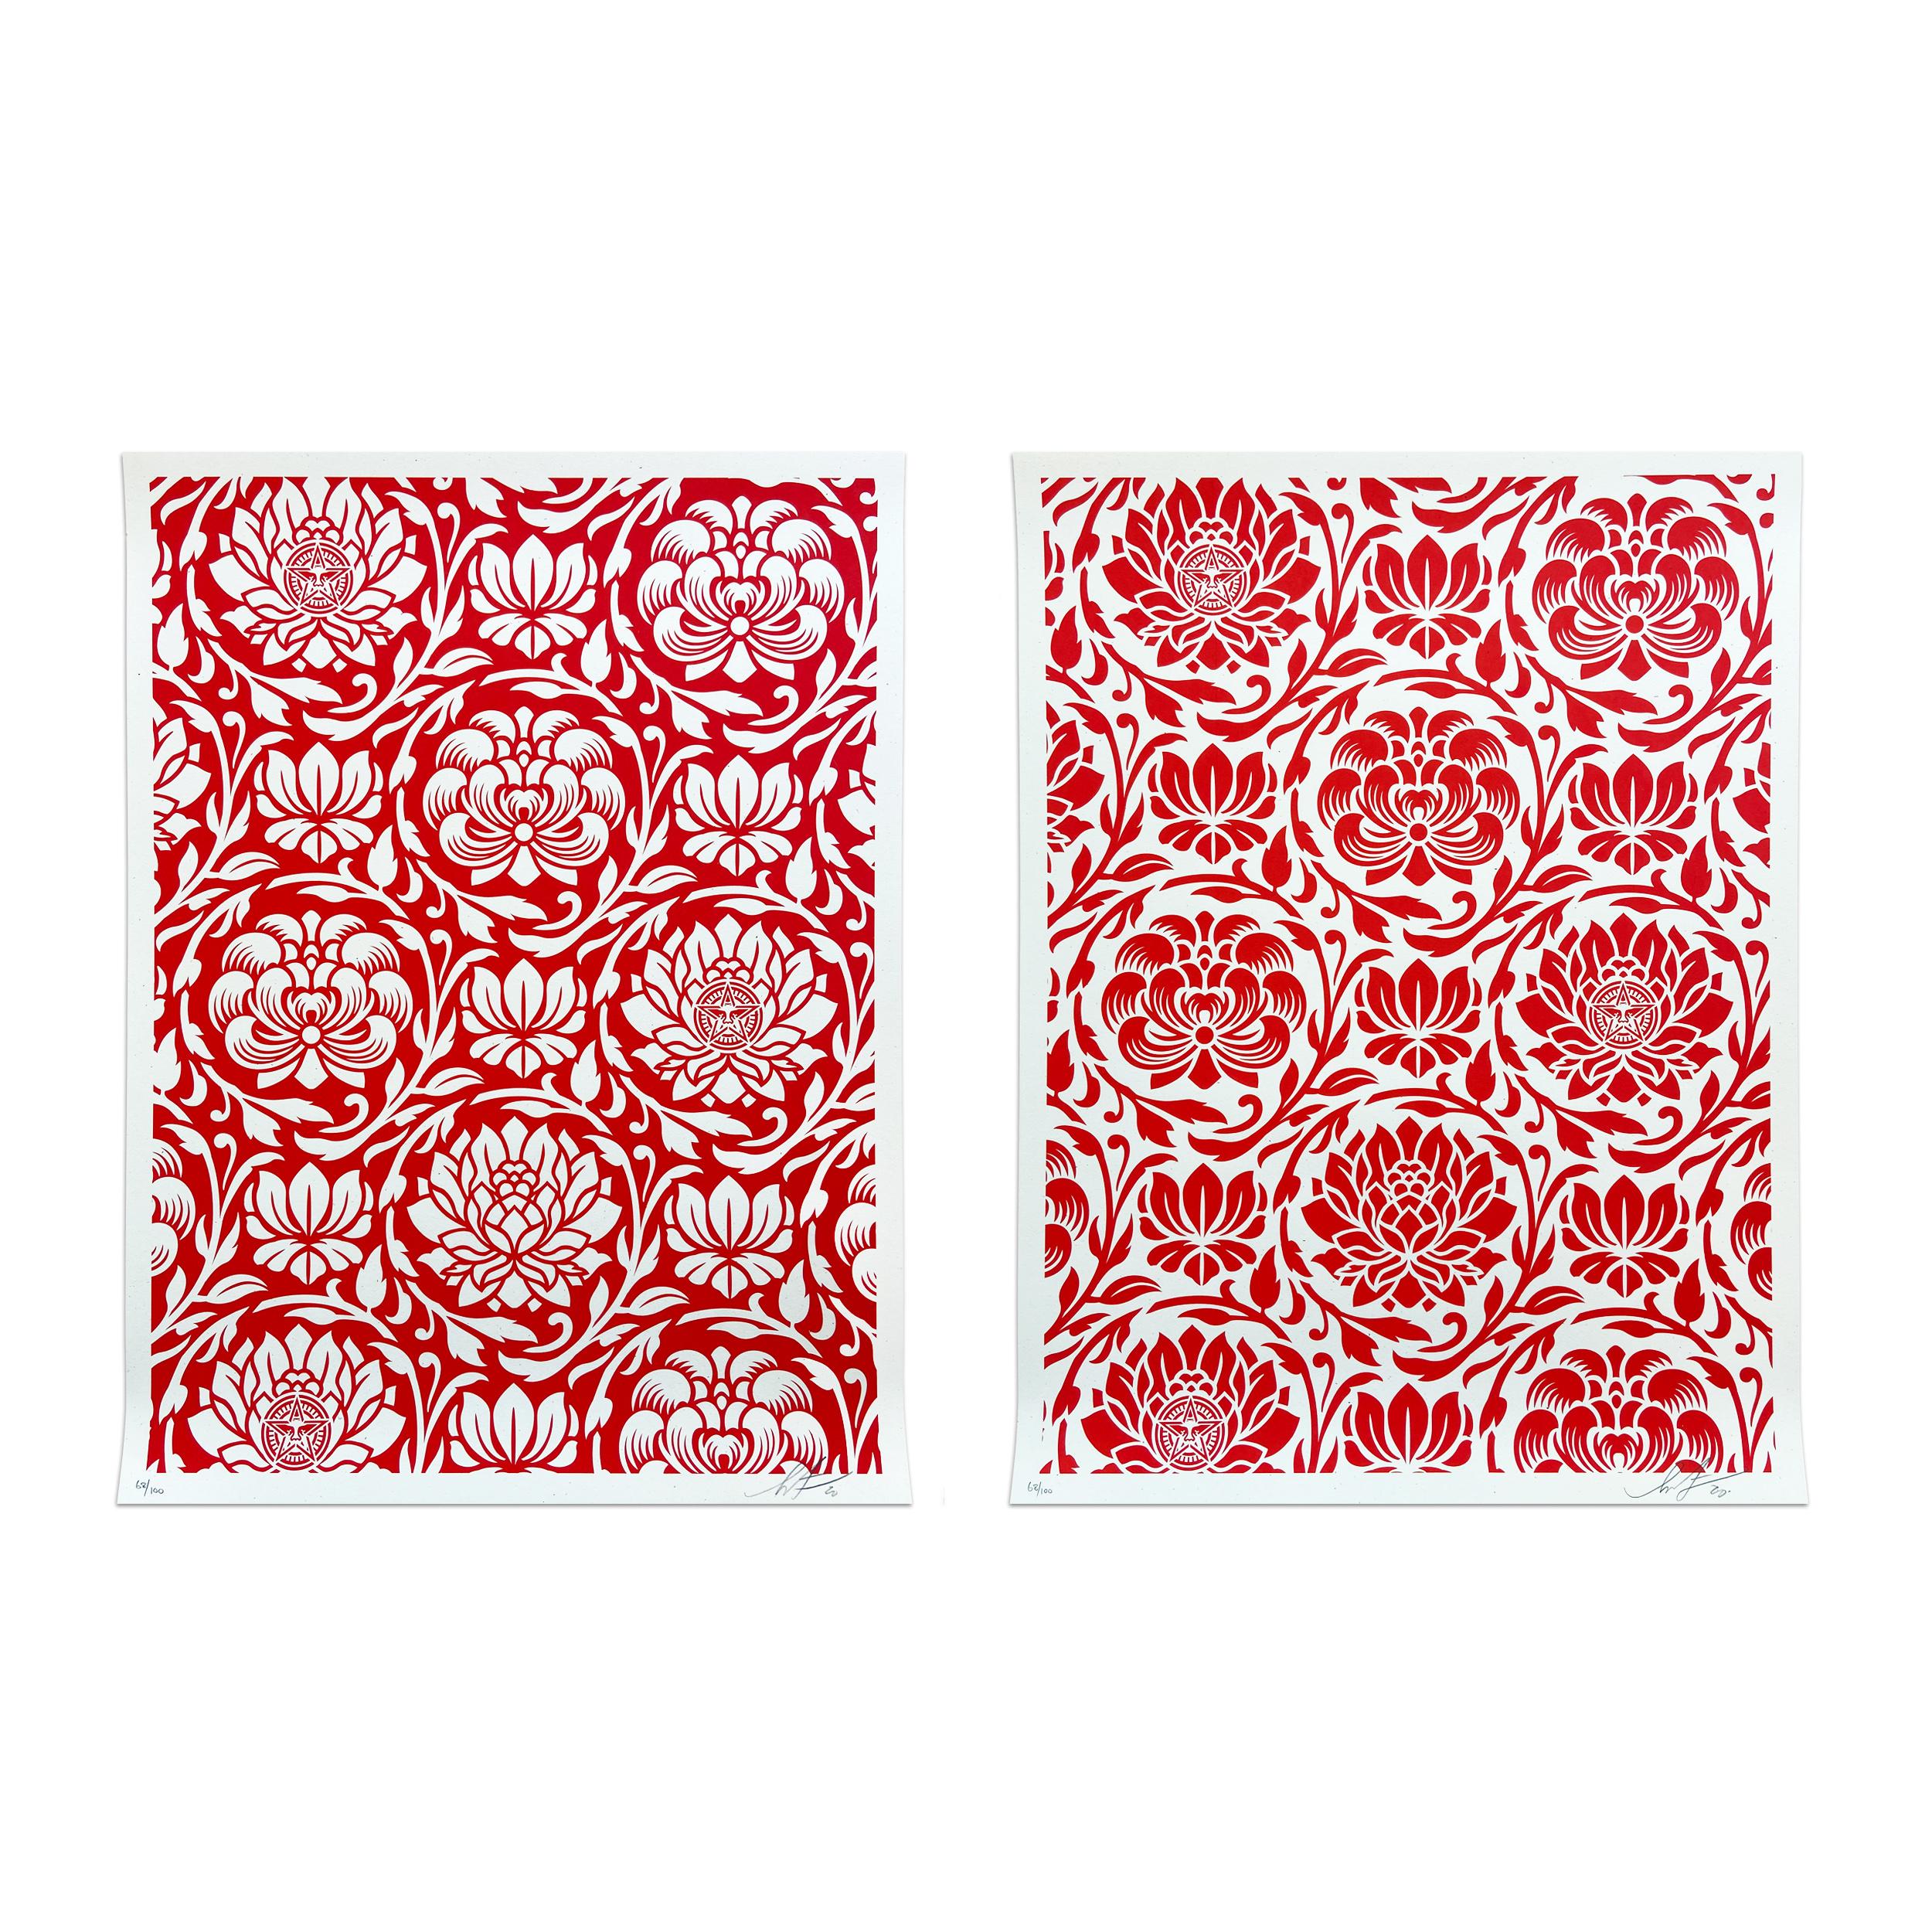 Shepard Fairey Abstract Print - Floral Harmony (Red Yin/Yang), Set of Silkscreens, Street Art, Obey Giant